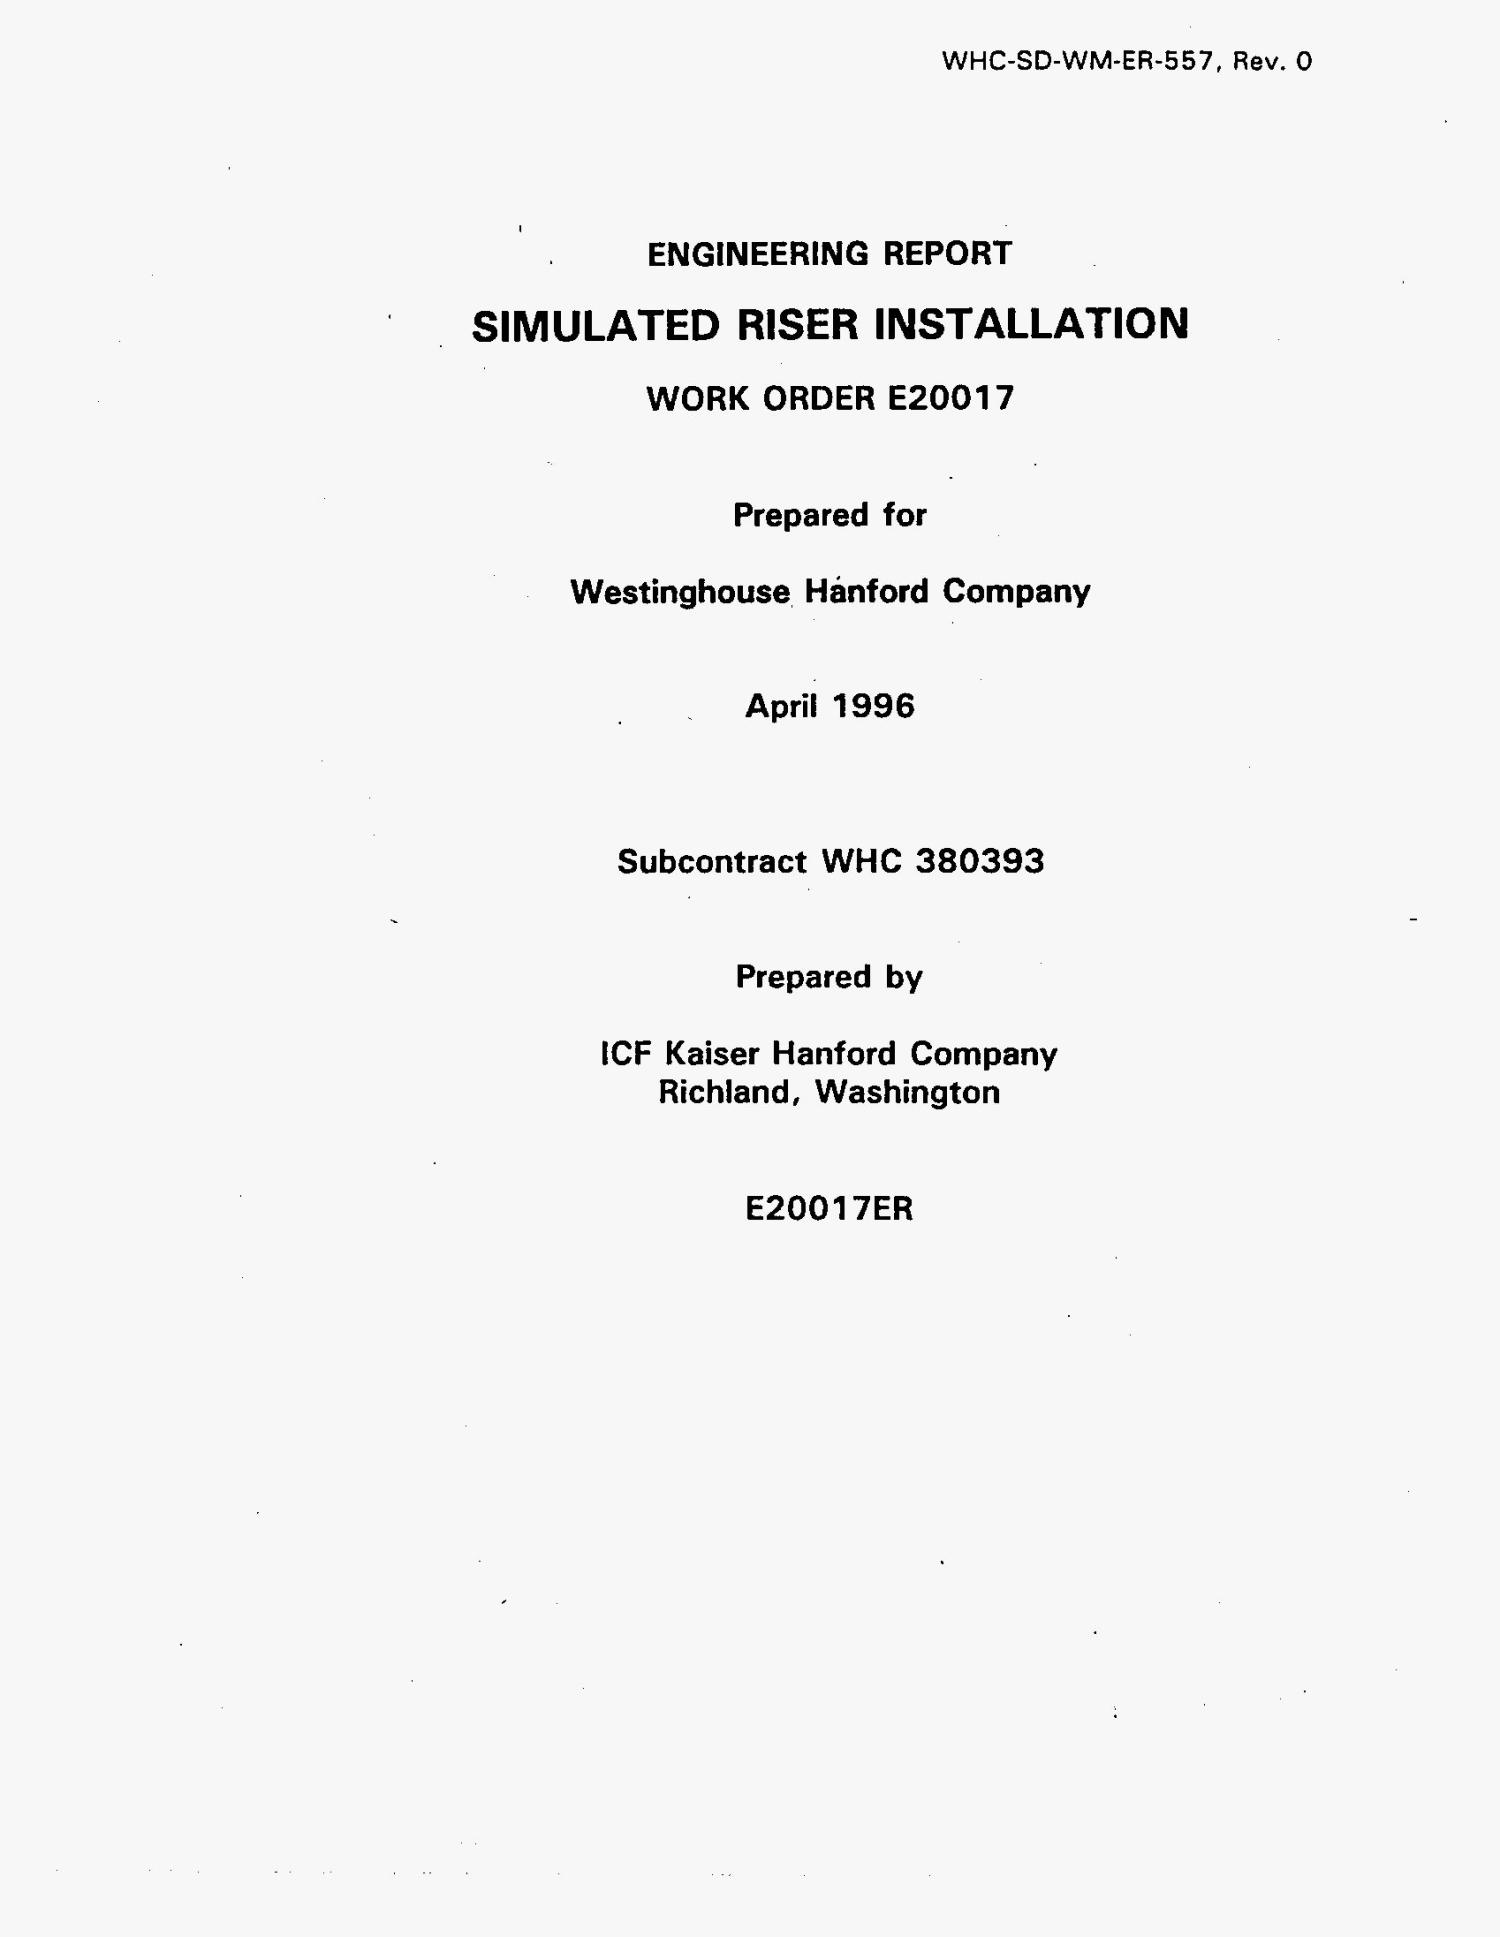 Engineering report for simulated riser installation
                                                
                                                    [Sequence #]: 3 of 183
                                                